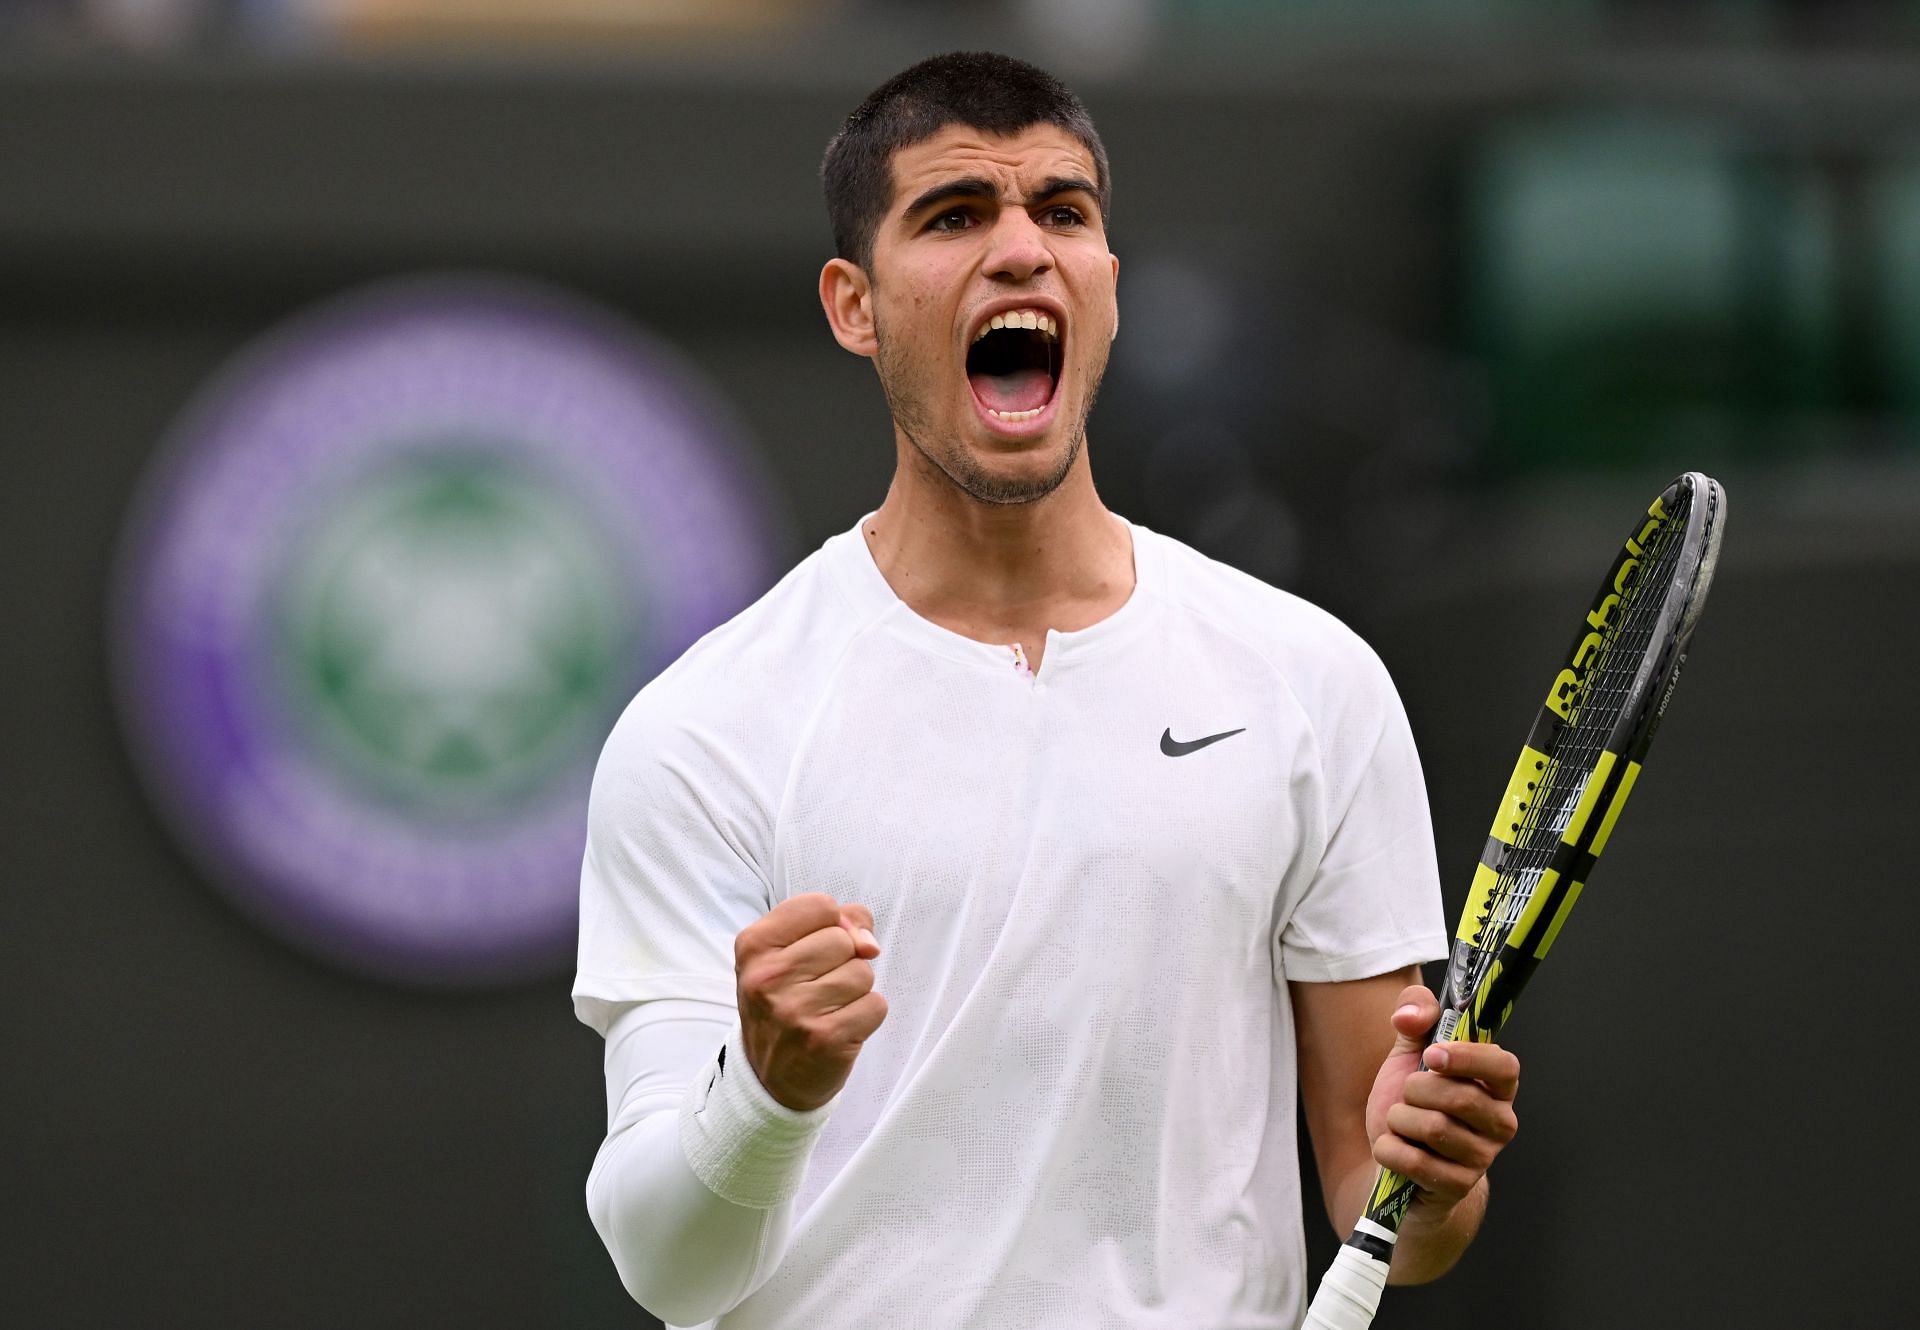 Carlos Alcaraz is through to the second round at Wimbledon.